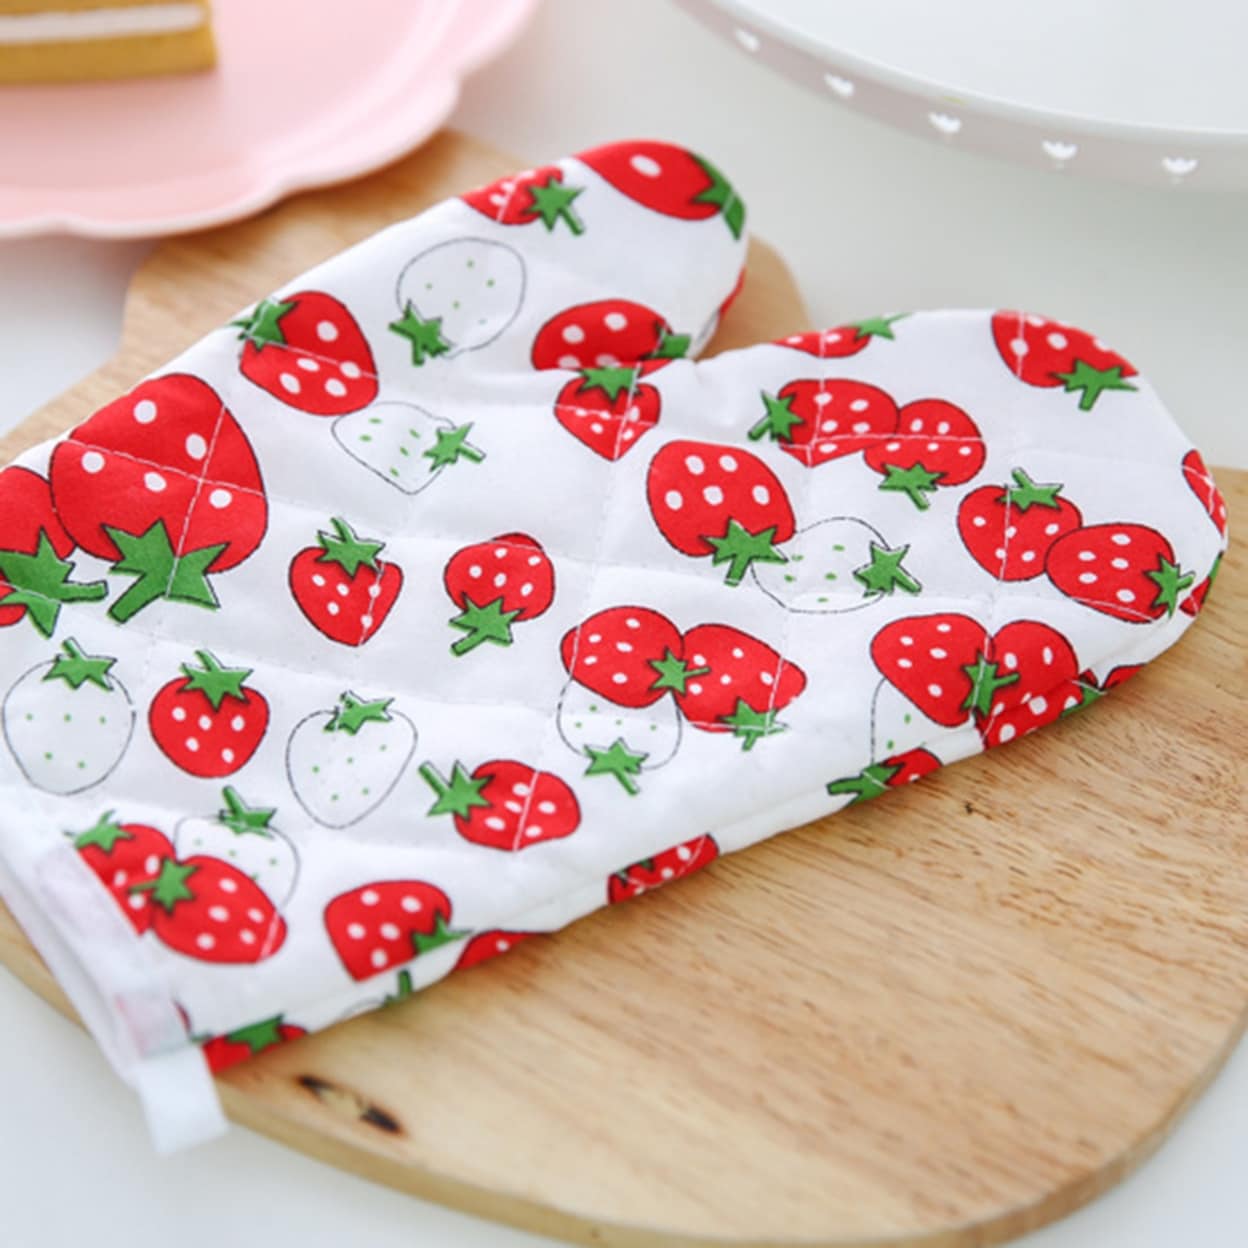 GROFRY 1Pc Pot Holders Machine Washable Thick Cotton Random Colors Soft  Cotton Lining Oven Gloves for Home 